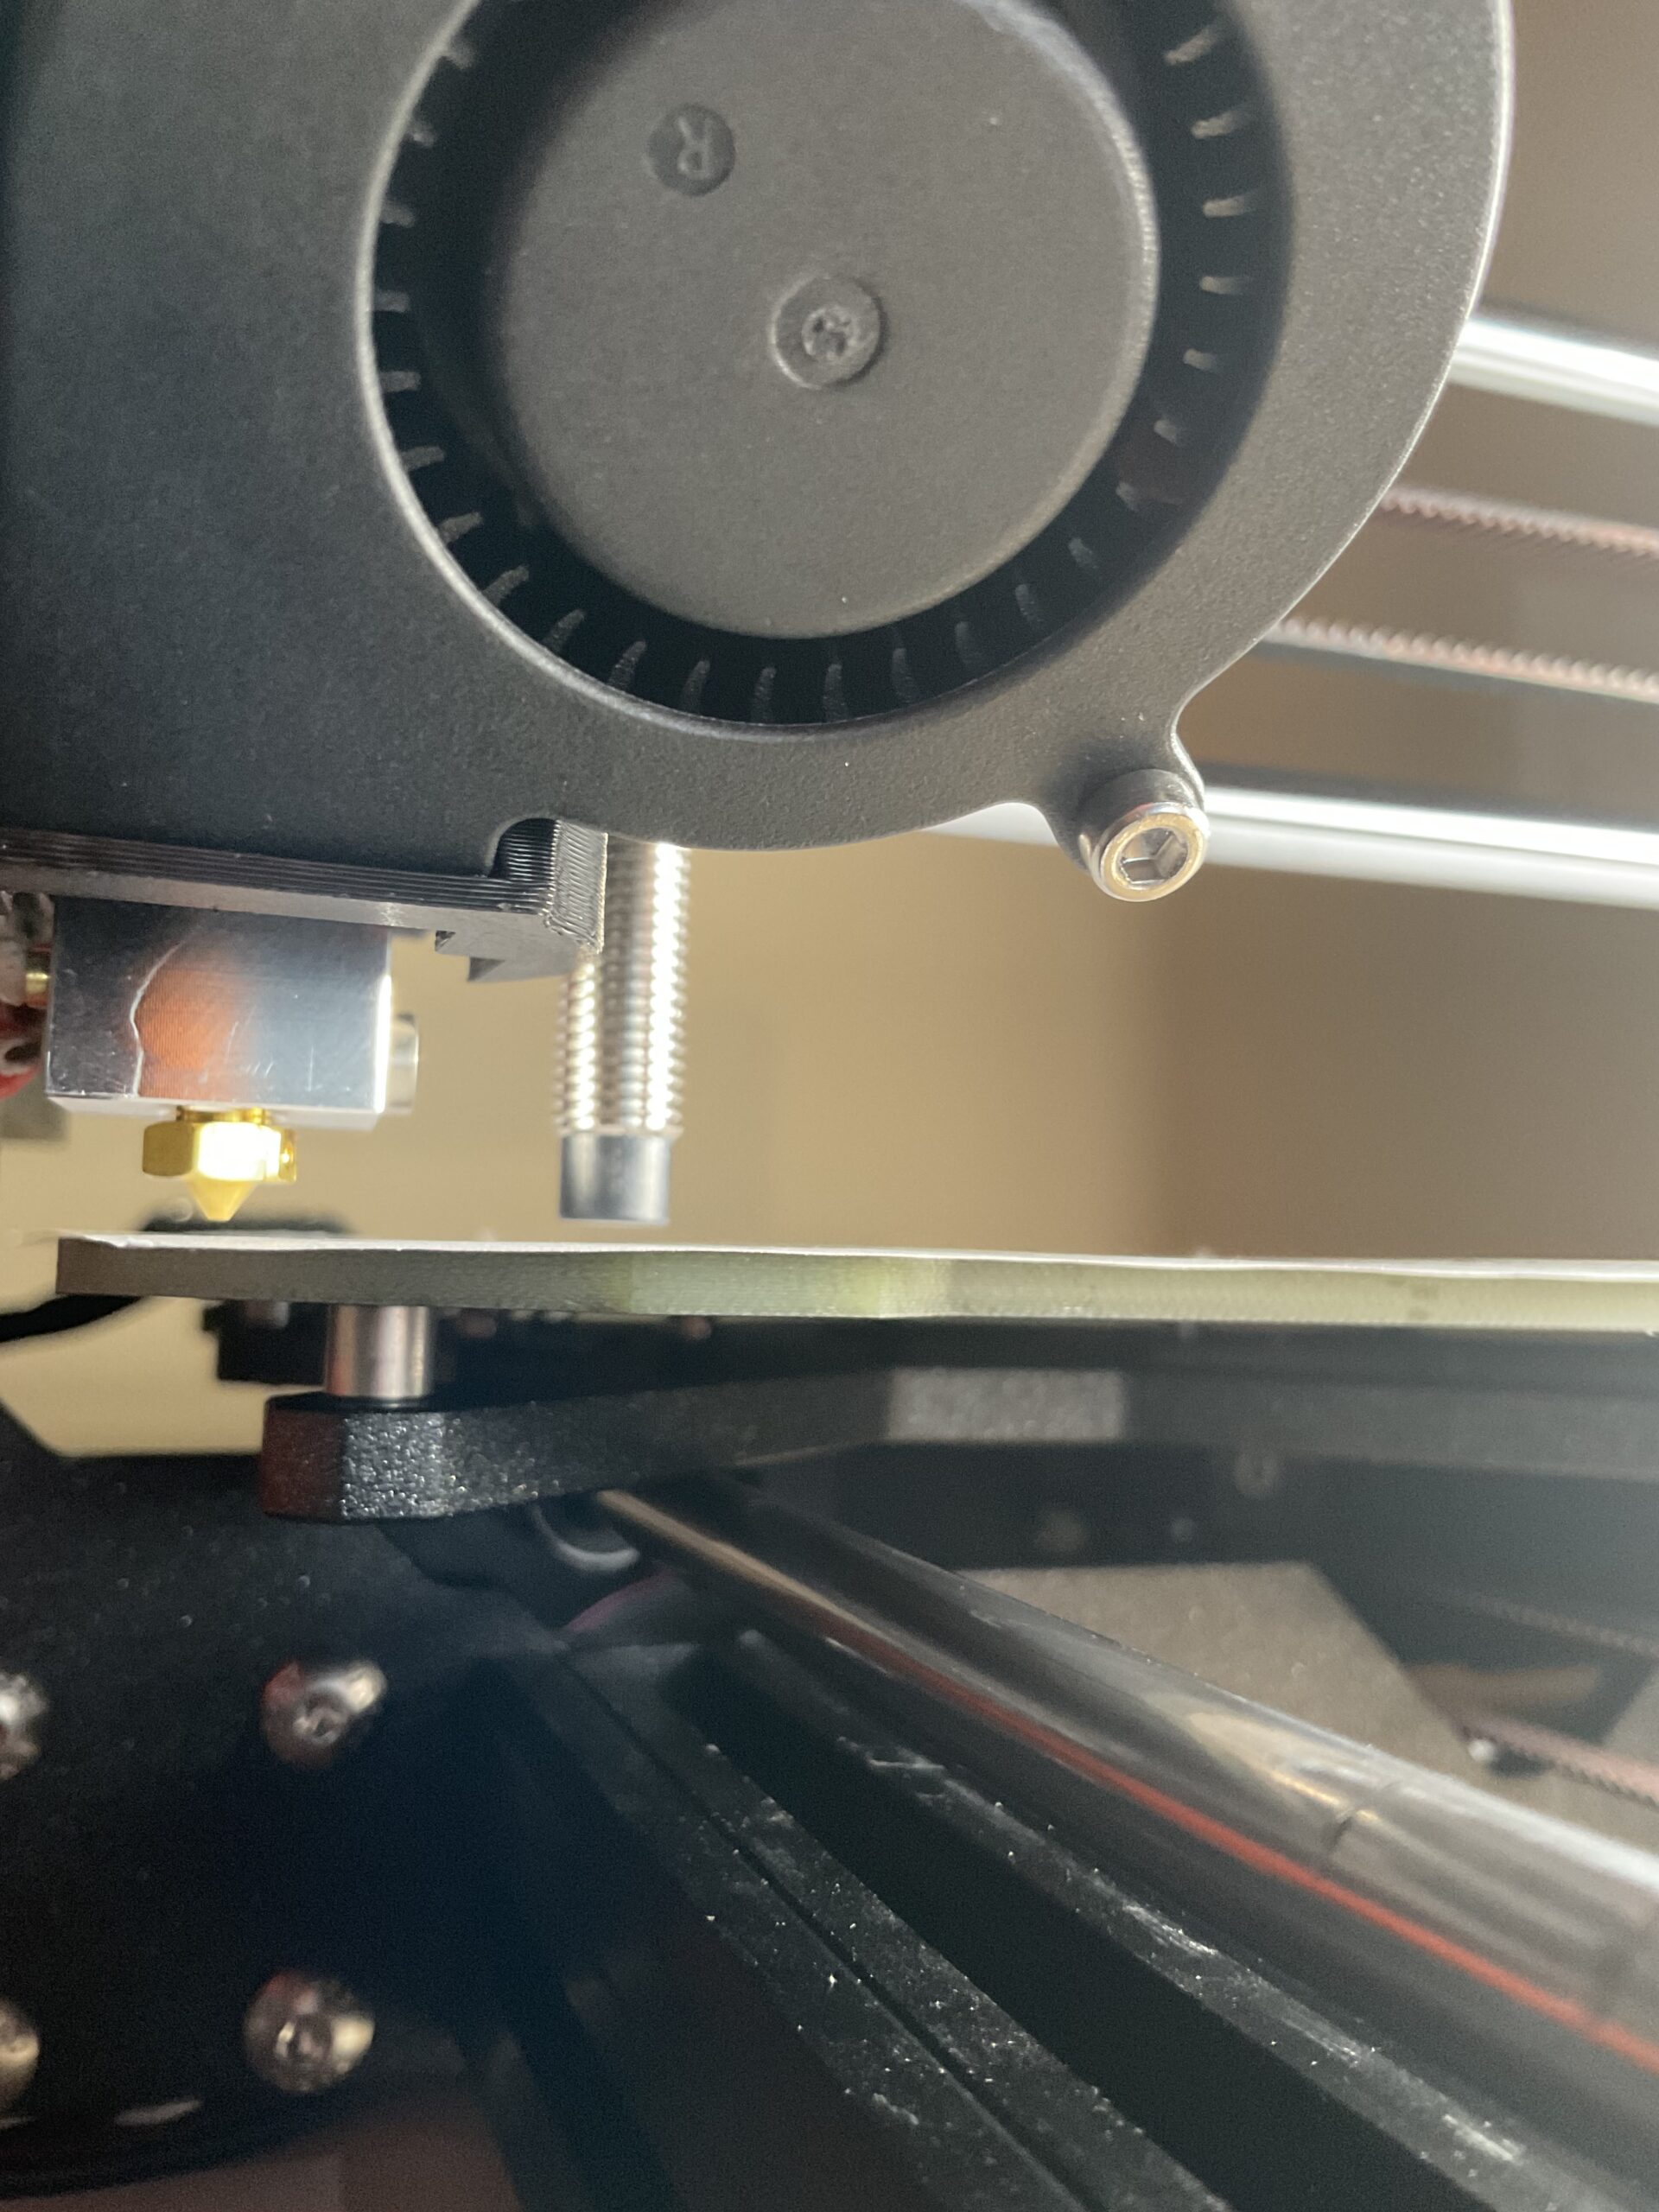 Preview tool head location incorrect · Issue #7773 · prusa3d